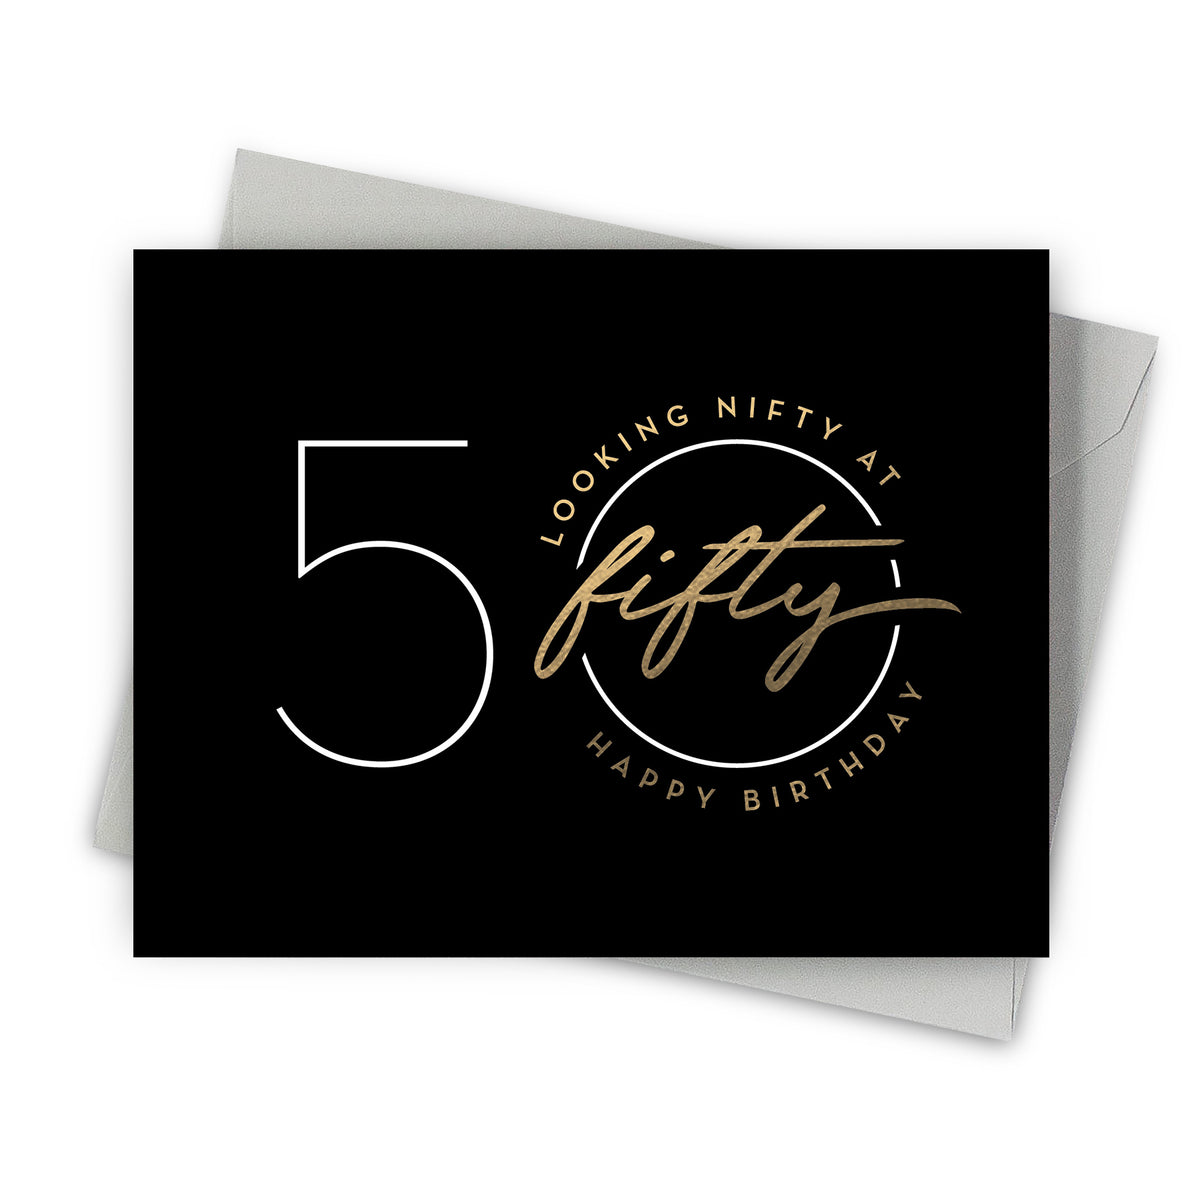 Nifty Fifty Birthday Card by Fine Moments